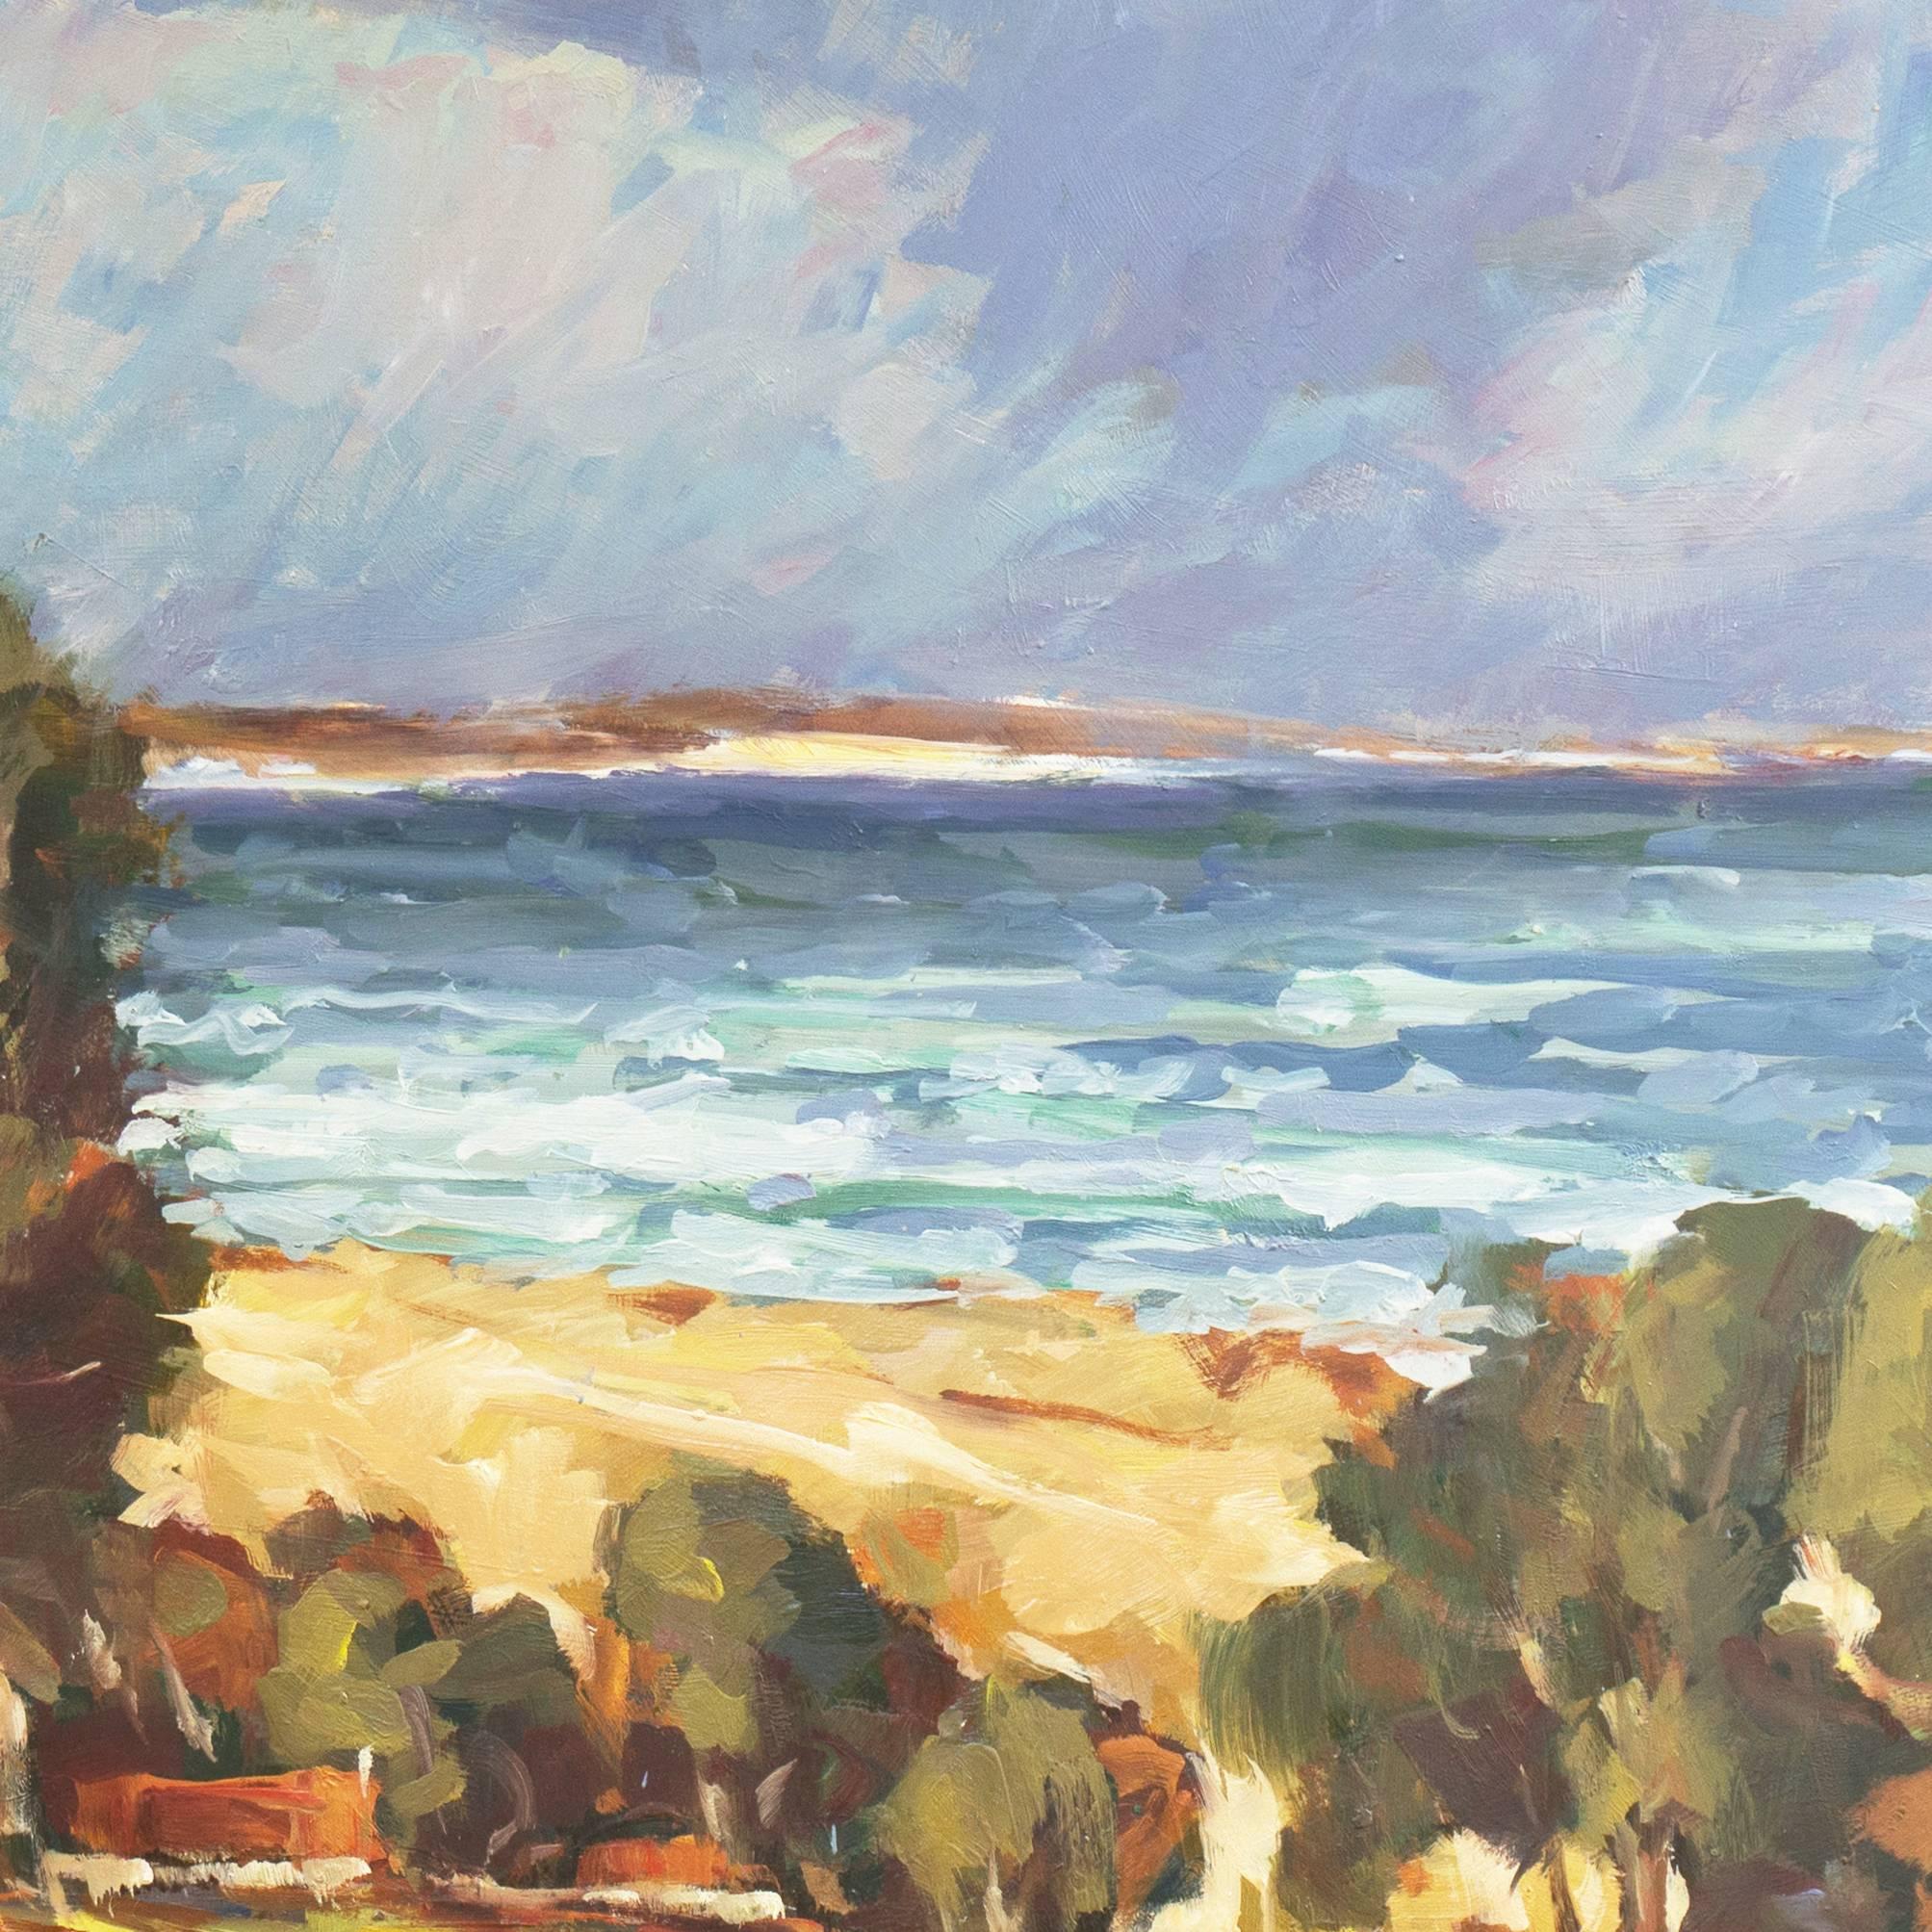 Signed lower right, 'Fred Korburg' and dated 1969; additionally signed, dated and titled verso, 'Coast at Elsinore, Denmark'.
Provenance: Los Robles Galleries, Palo Alto, California. 

Born in Denmark, Frederick Korburg first studied at the Graphic